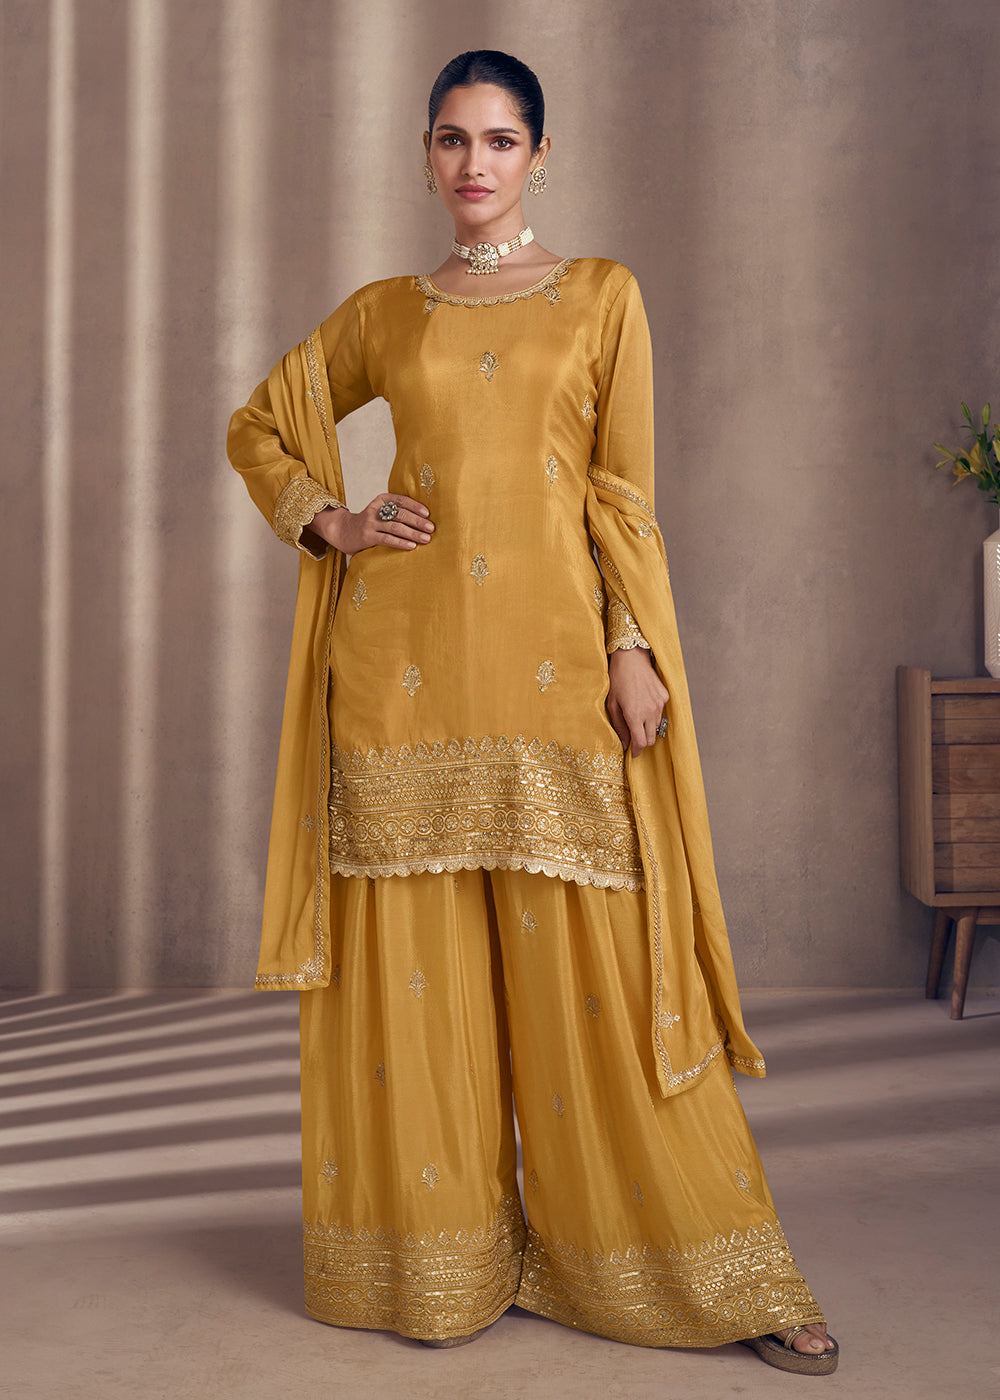 Pink Sharara Suit for Women Party Wear | Sharara Dress for Party